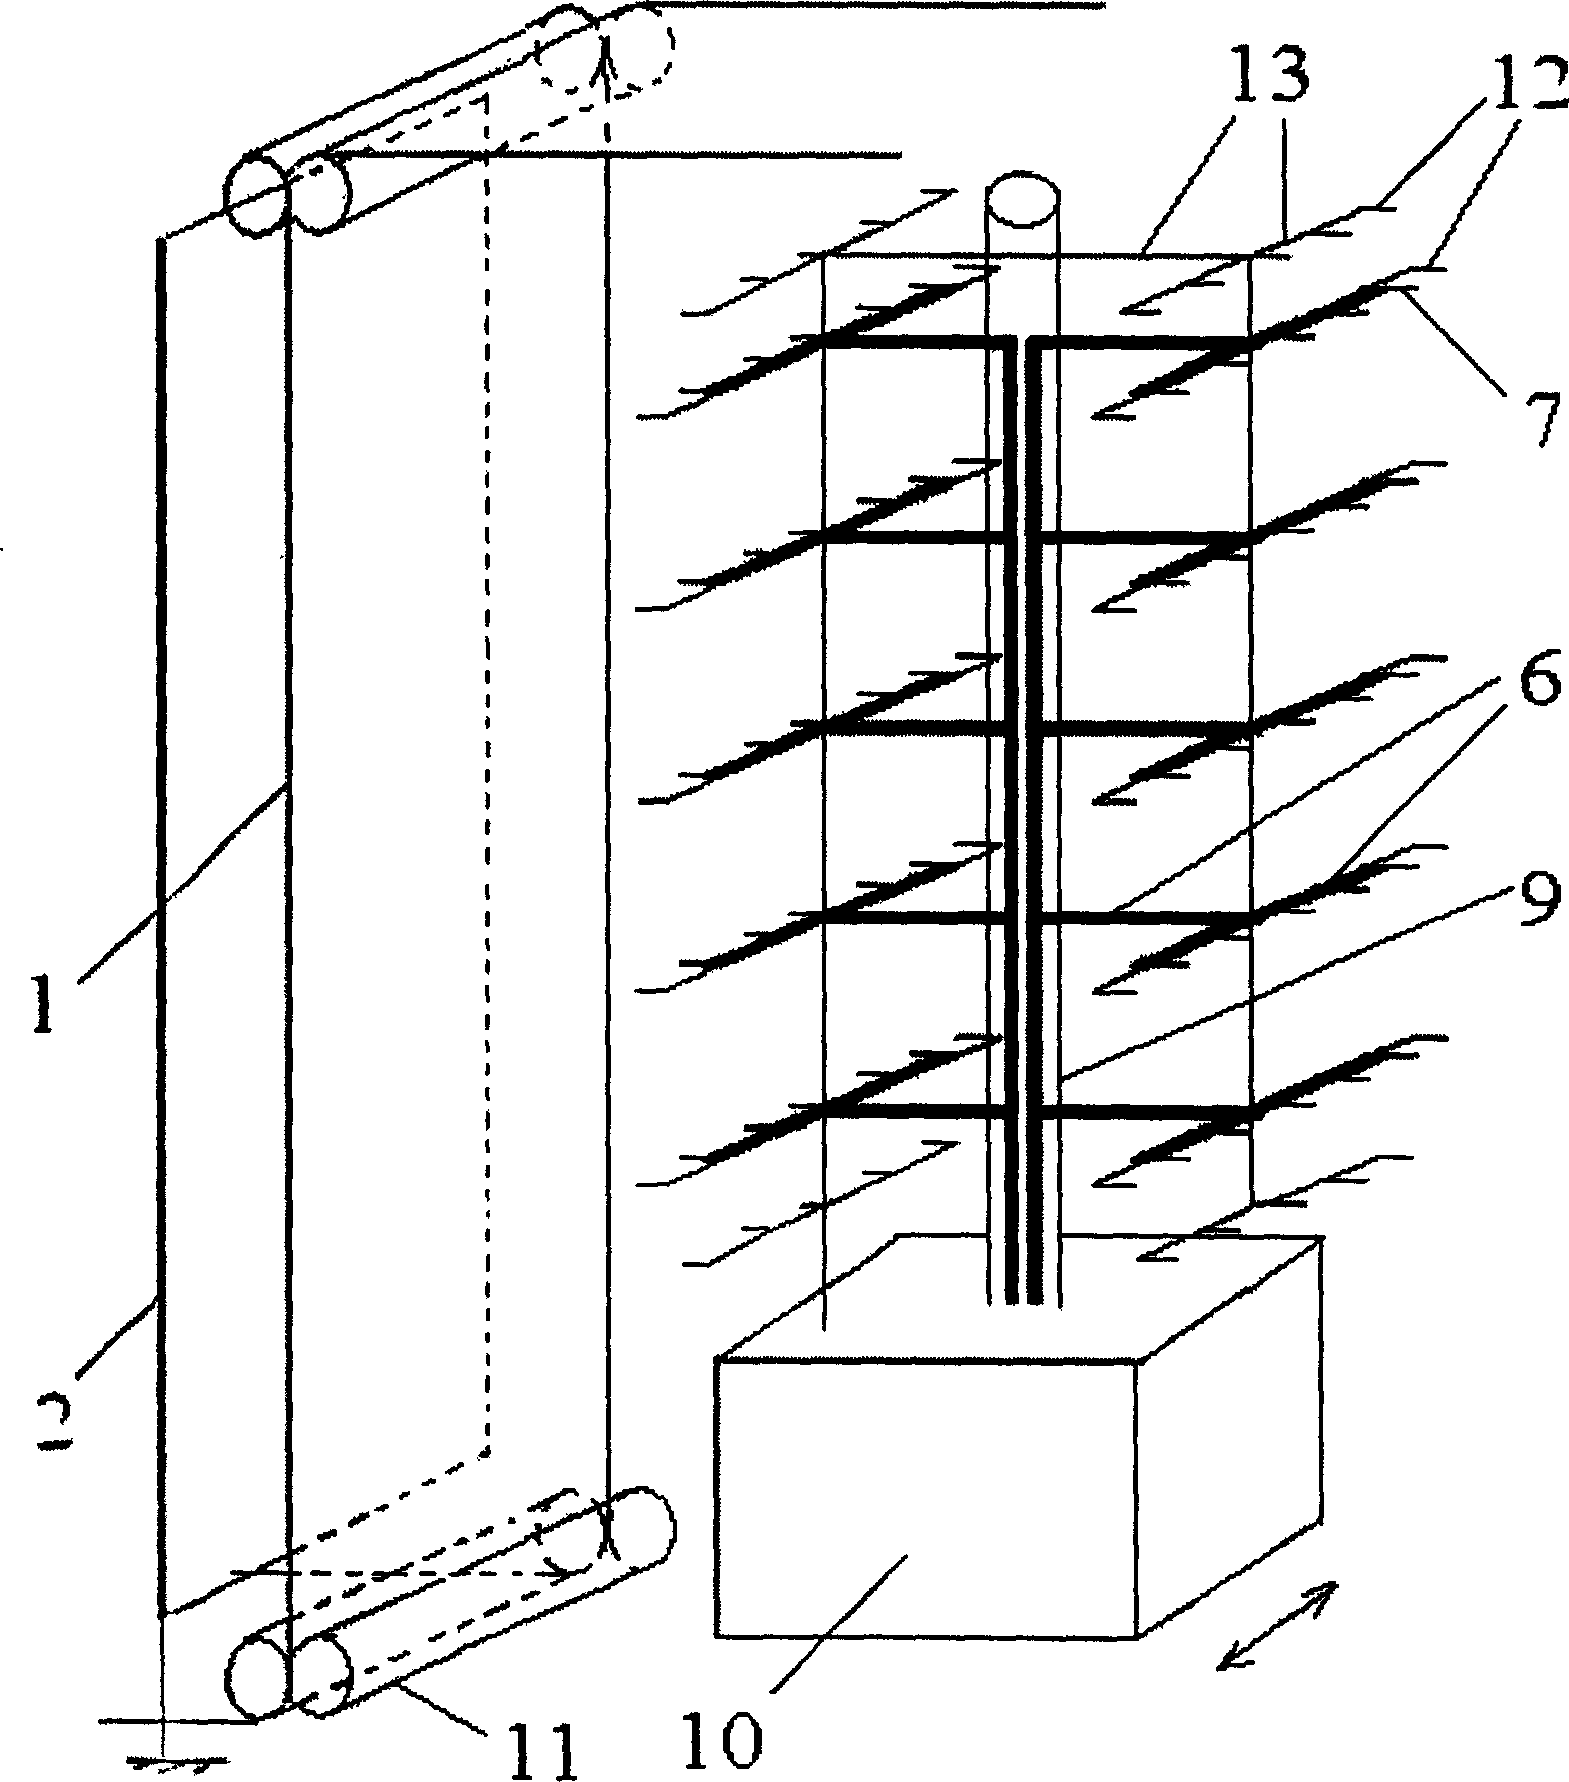 Device and method for preparing combined continuous electro-spinning nano fibrous membrane